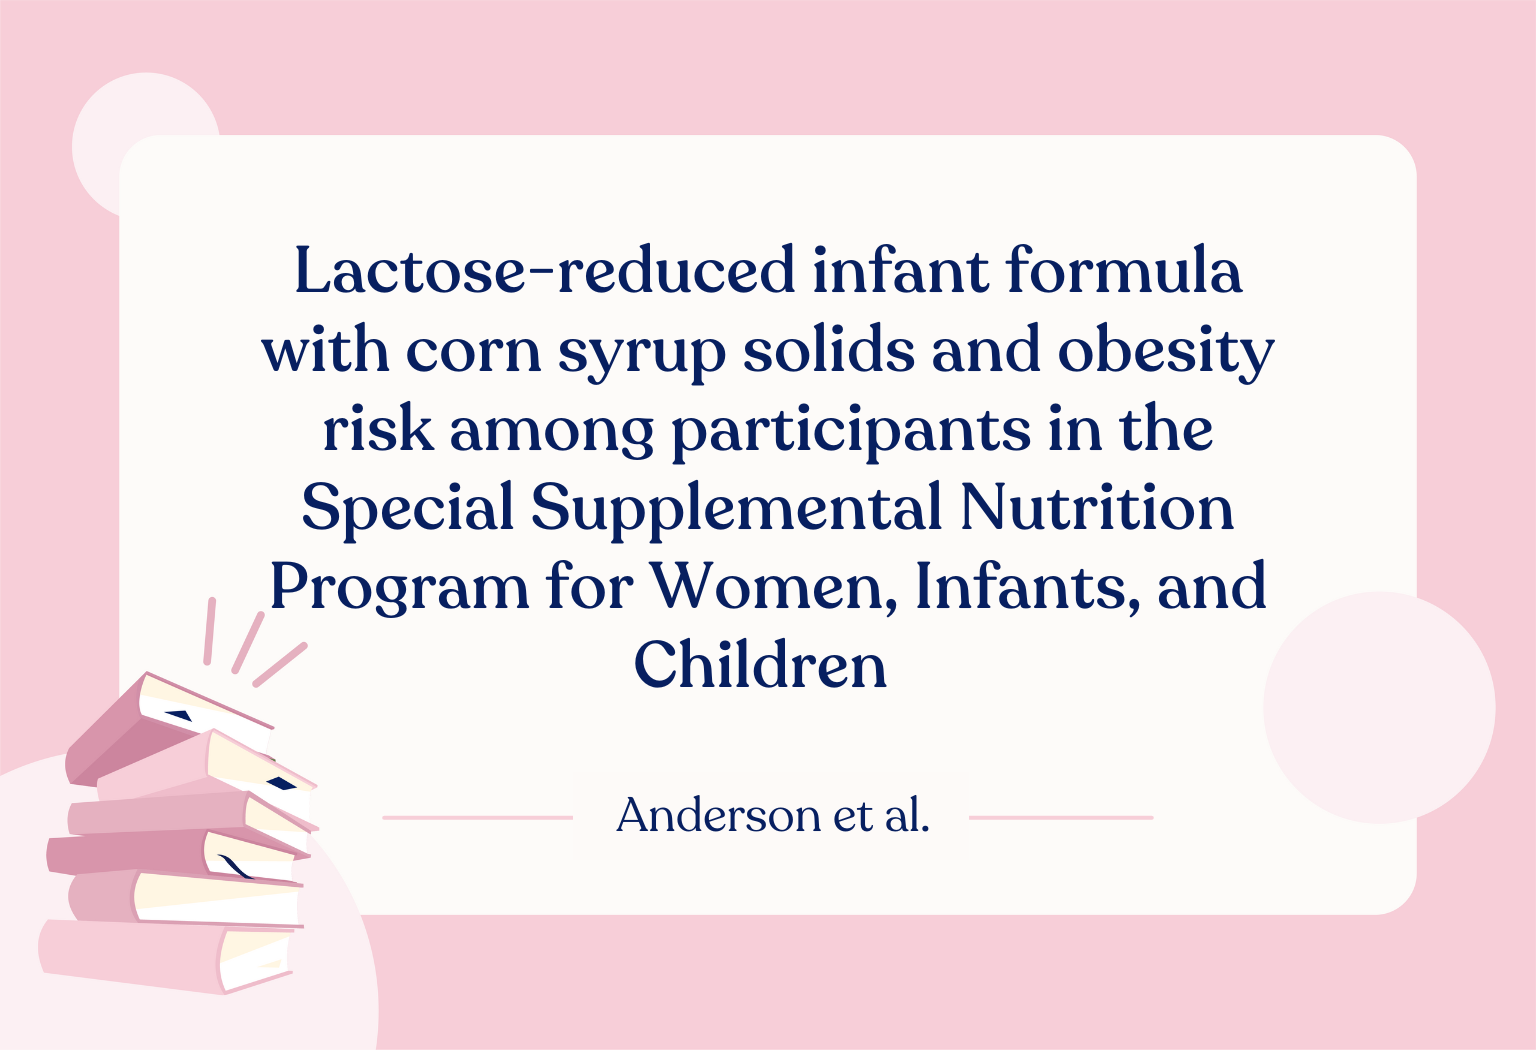 Lactose reduced formula with corn syrup and obesity